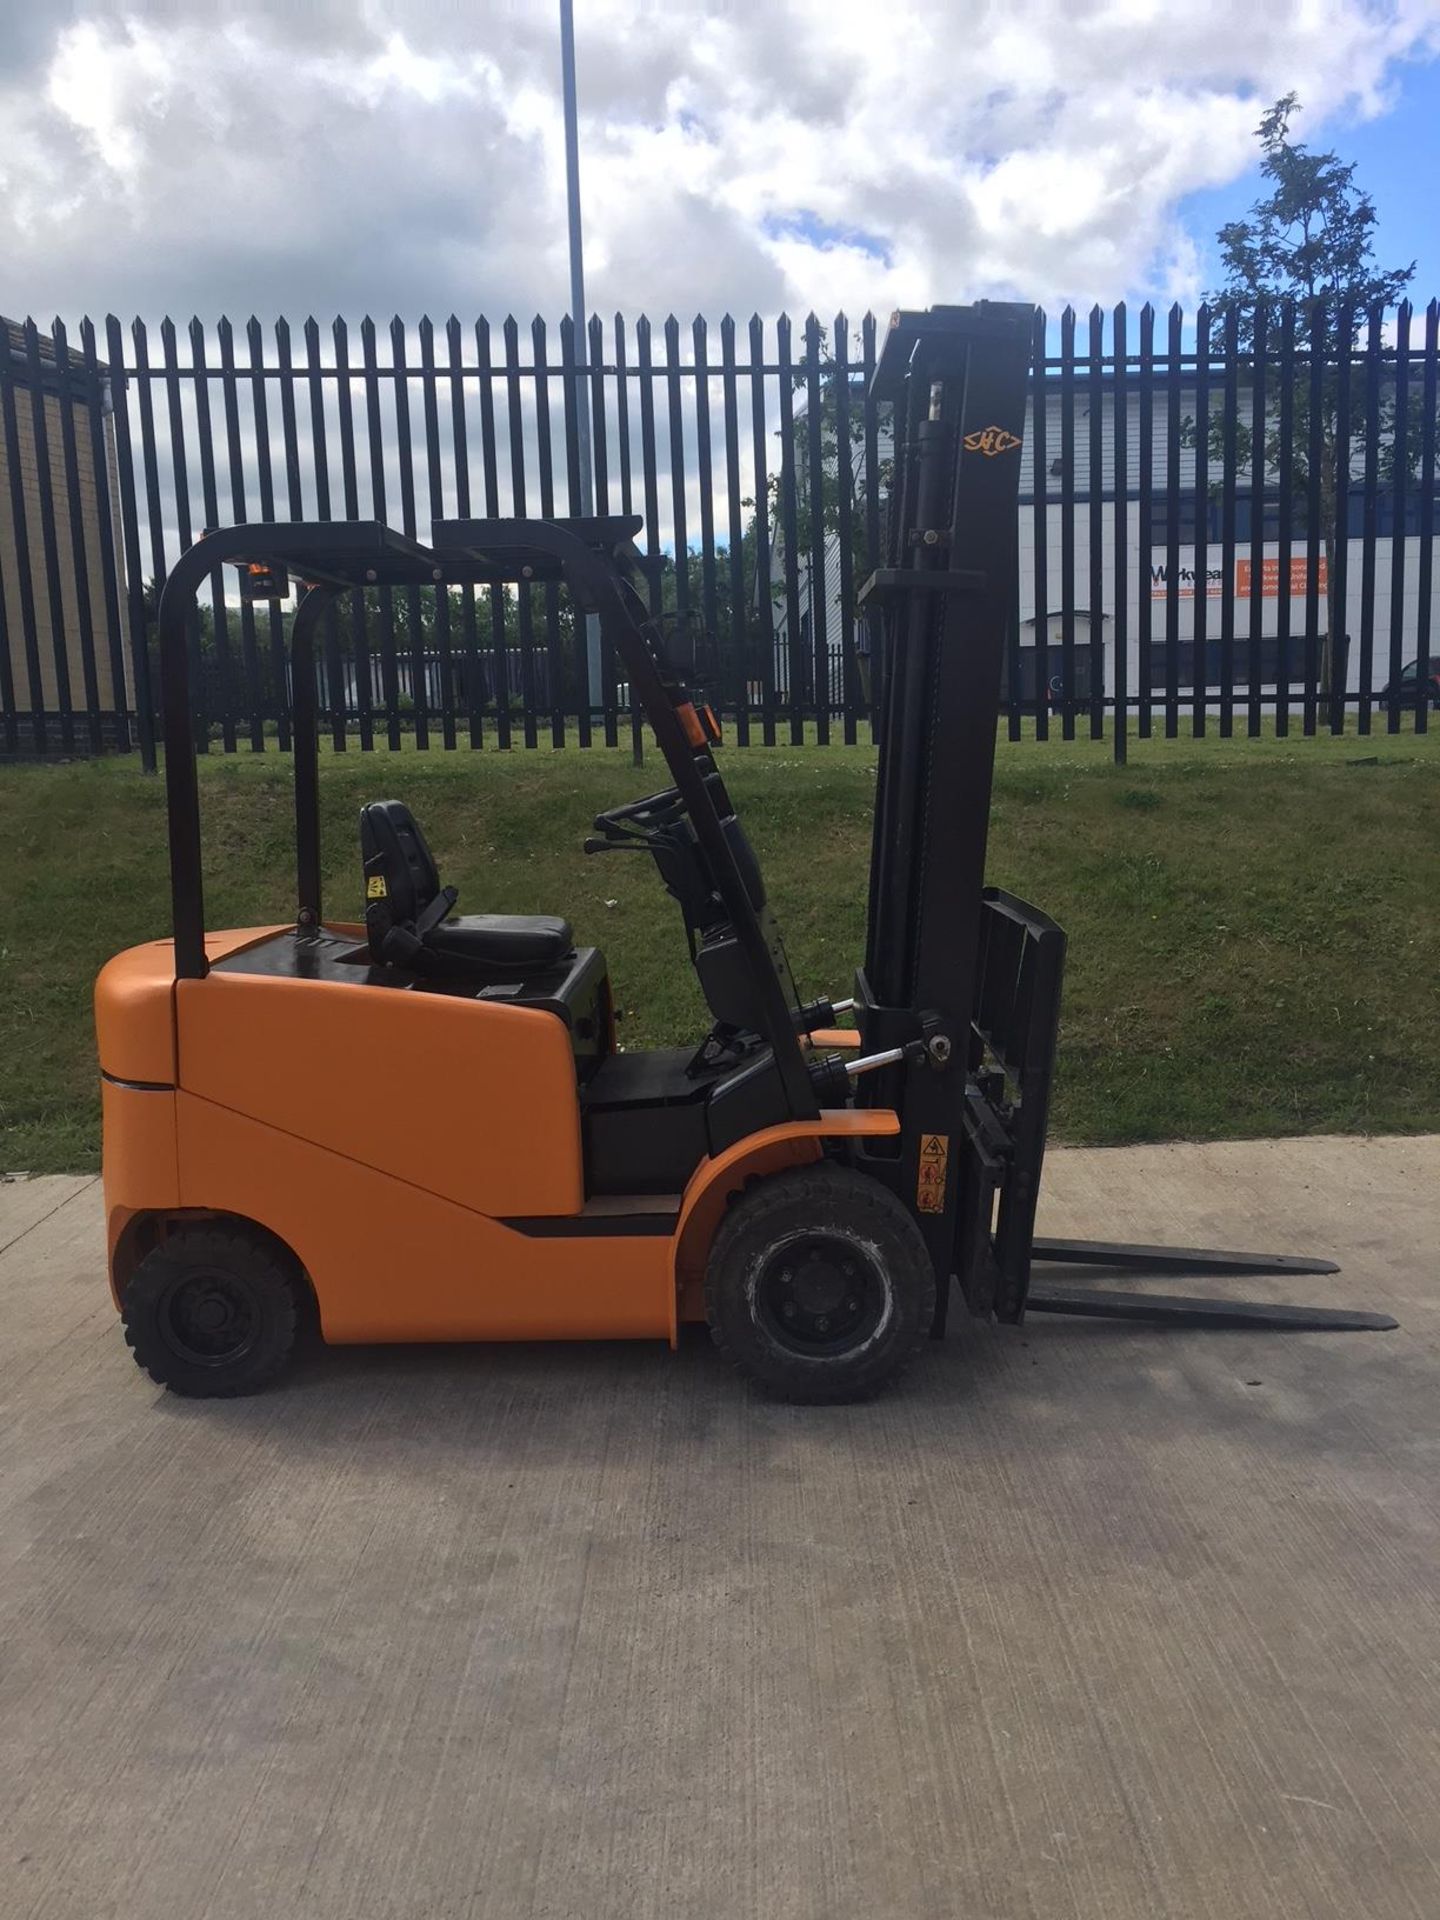 Sam-uk electric counterbalance fork lift truck - Image 2 of 9